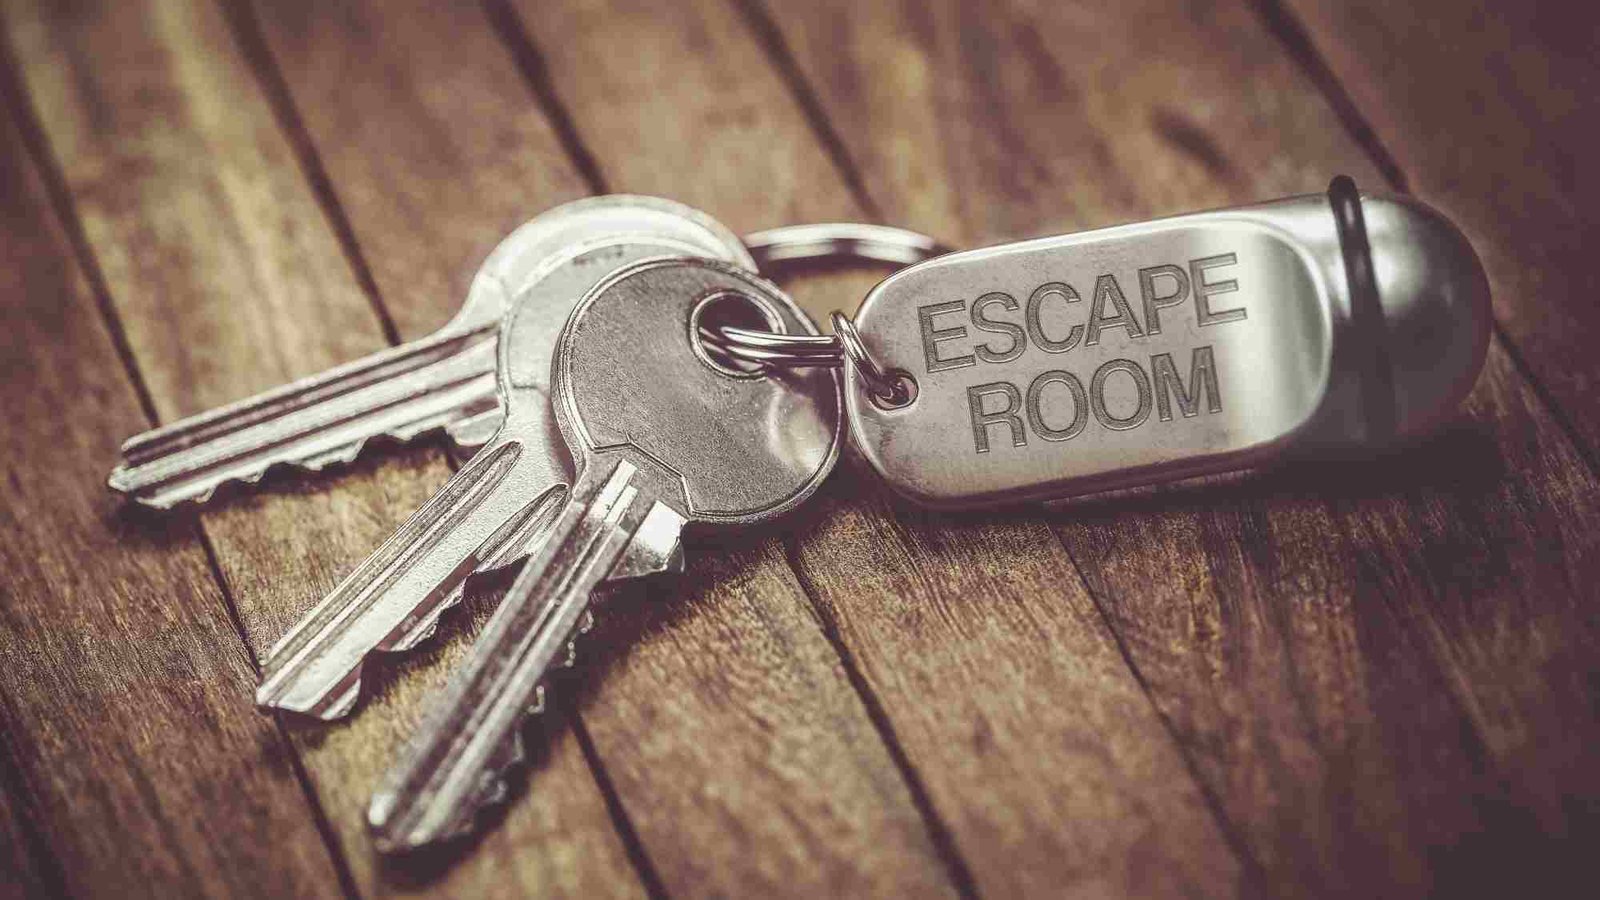 How to Beat an Escape Room: 4 Simple Tips